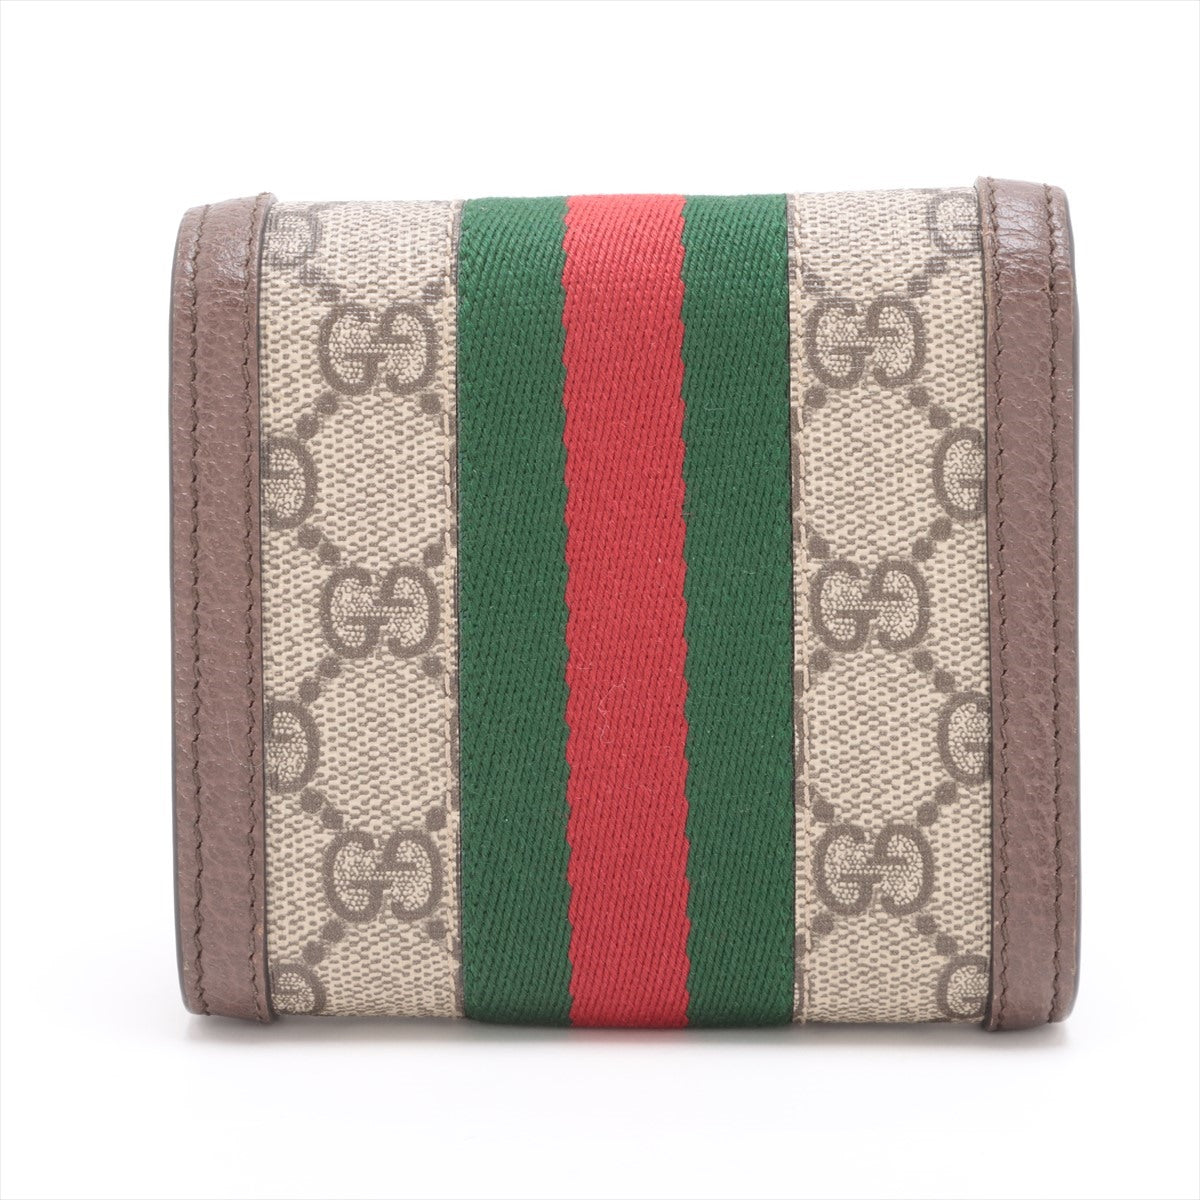 Gucci GG Supreme 598662 PVC & leather Compact Wallet Beige